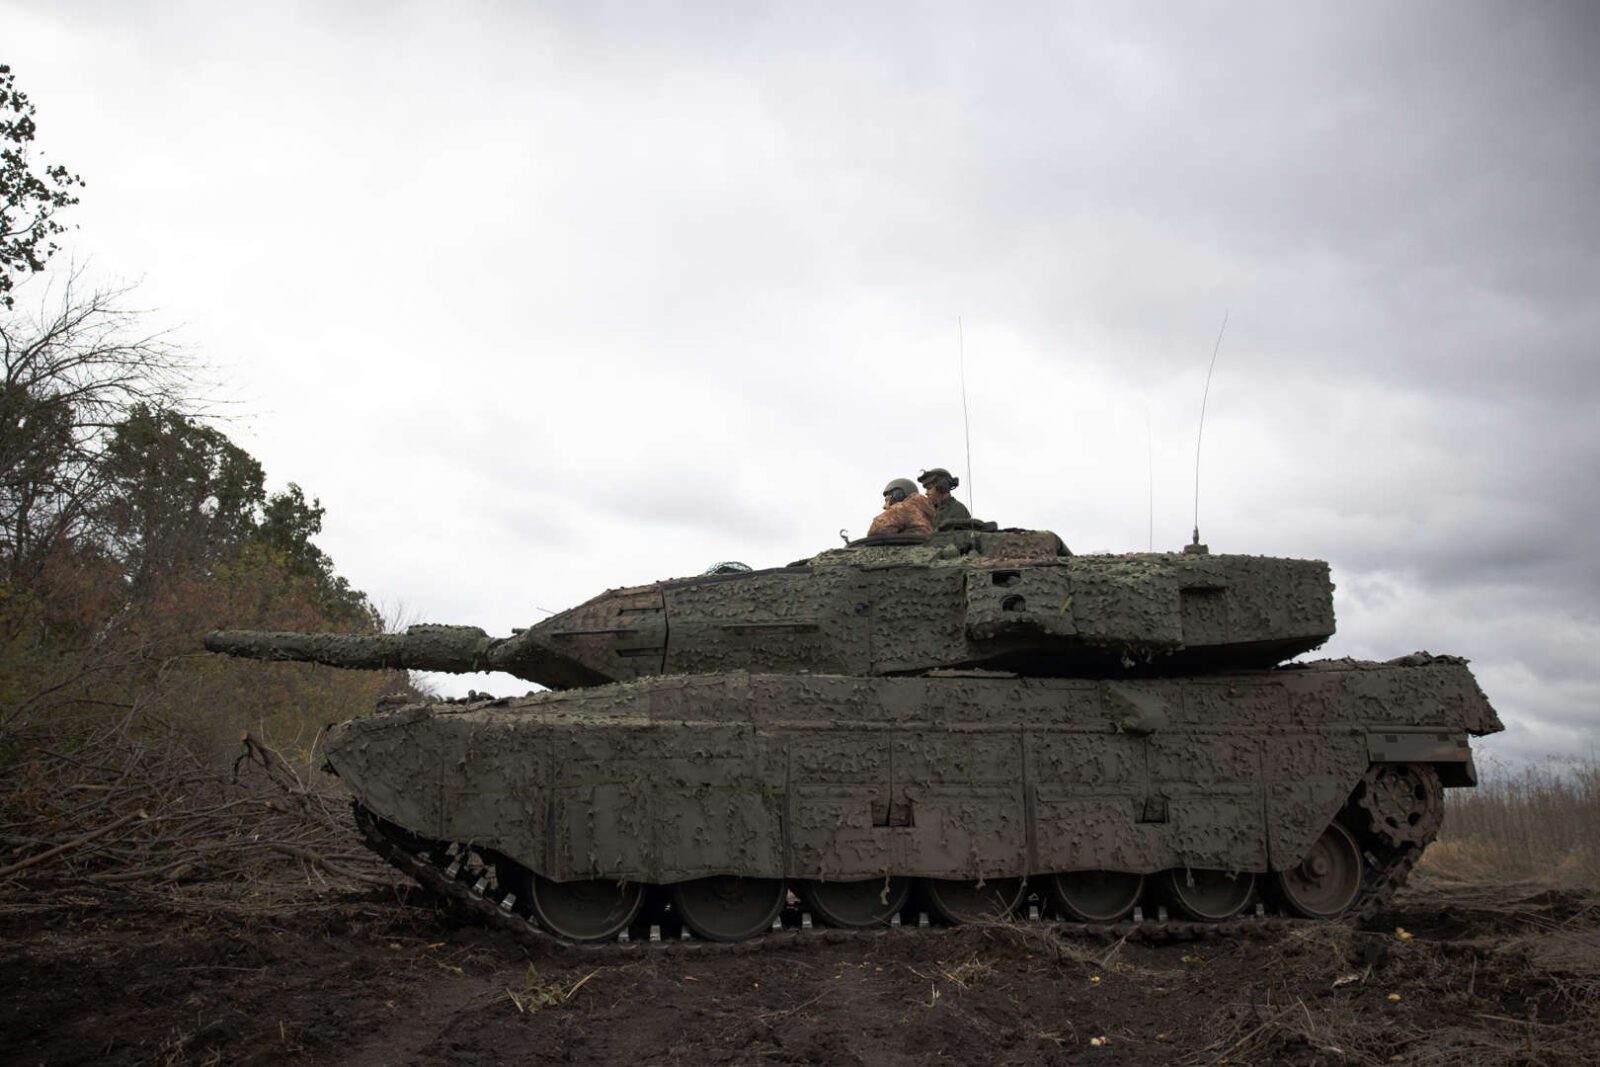 Everyone wants this tank, Russia and Ukraine fight to recover valuable weapon lost in battle